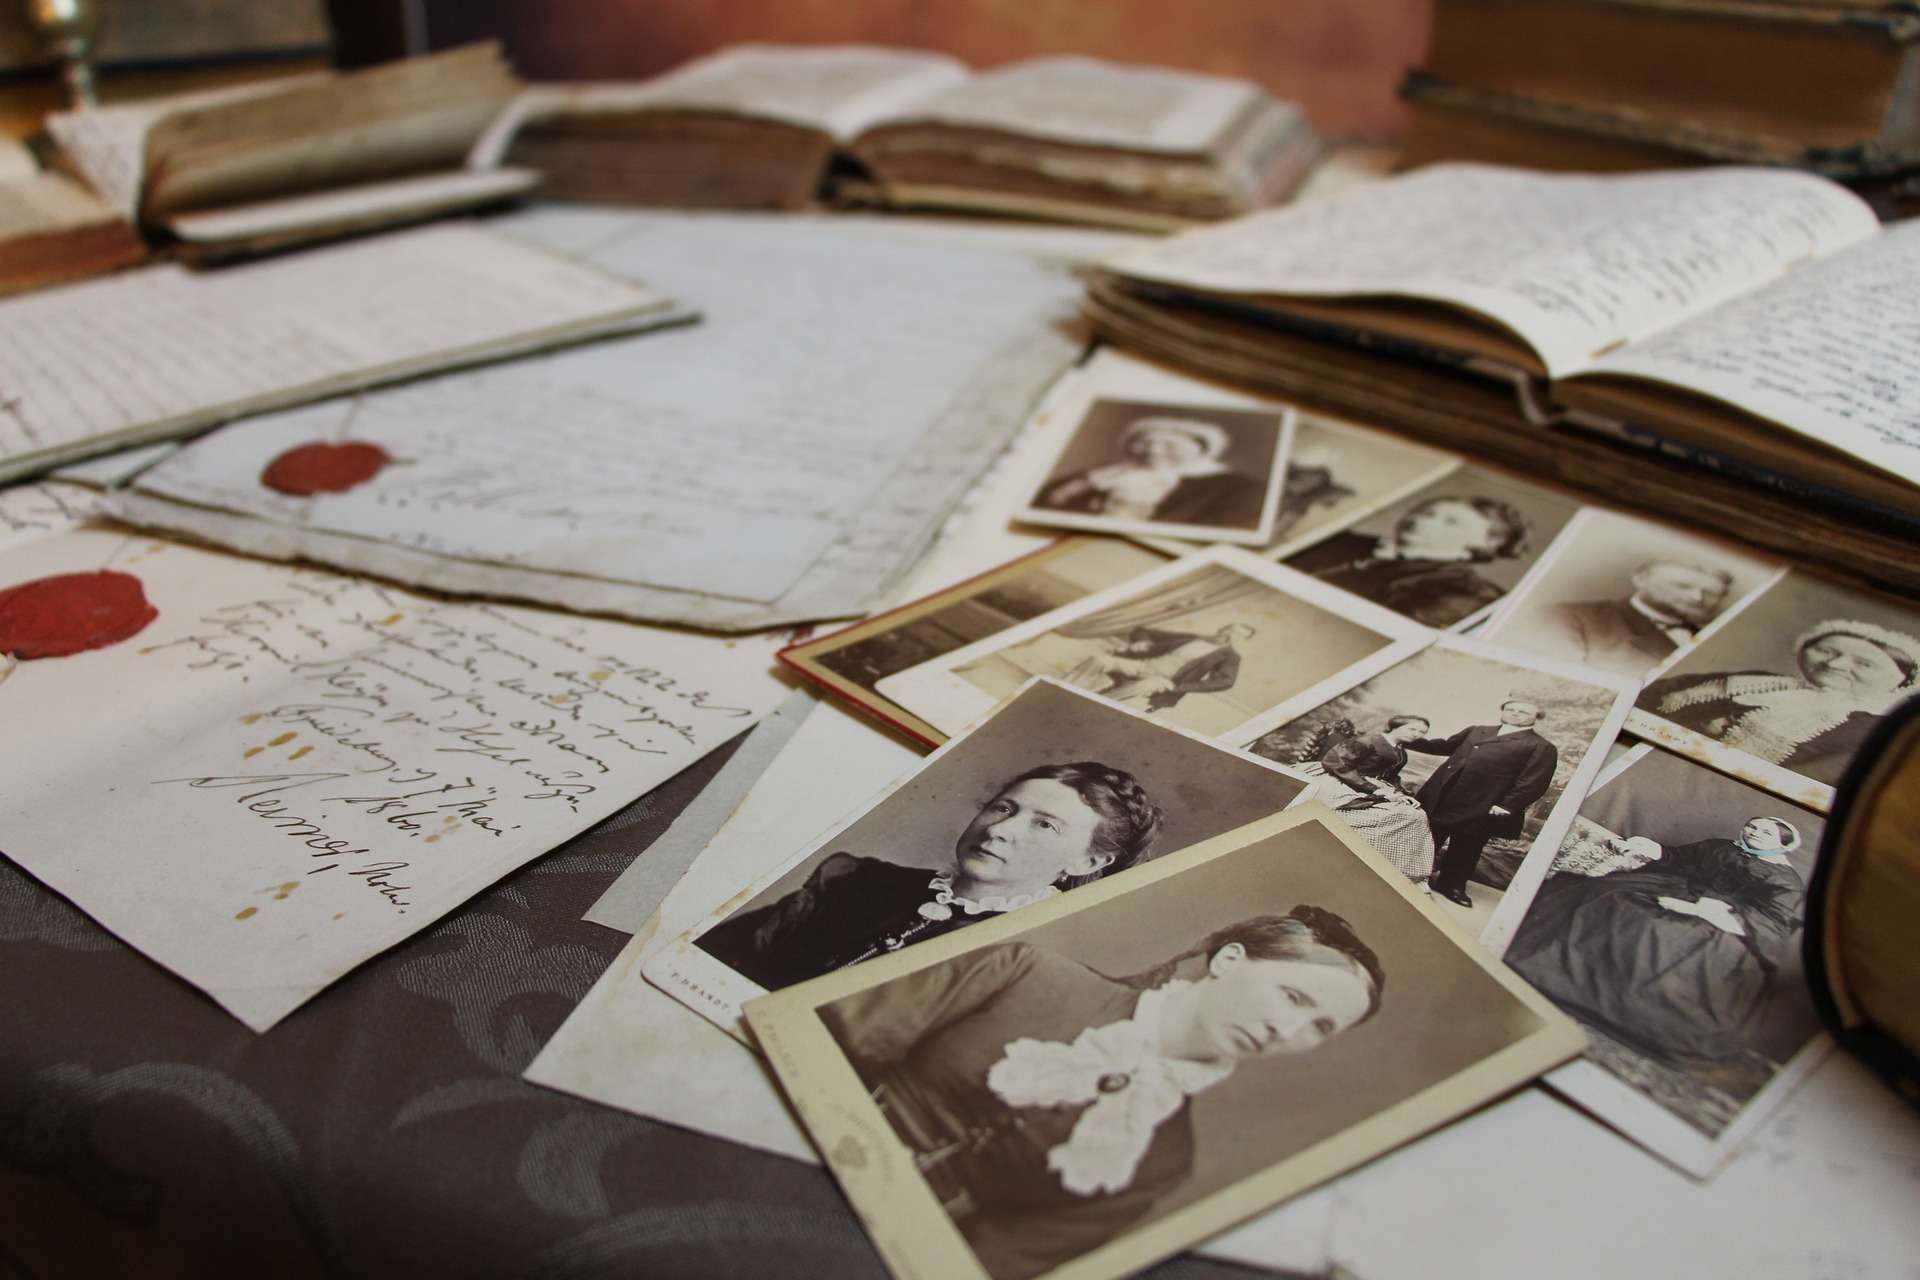 table covered by old handwritten letters with red wax seals, open books, and rows of vintage photographs of ladies and couples